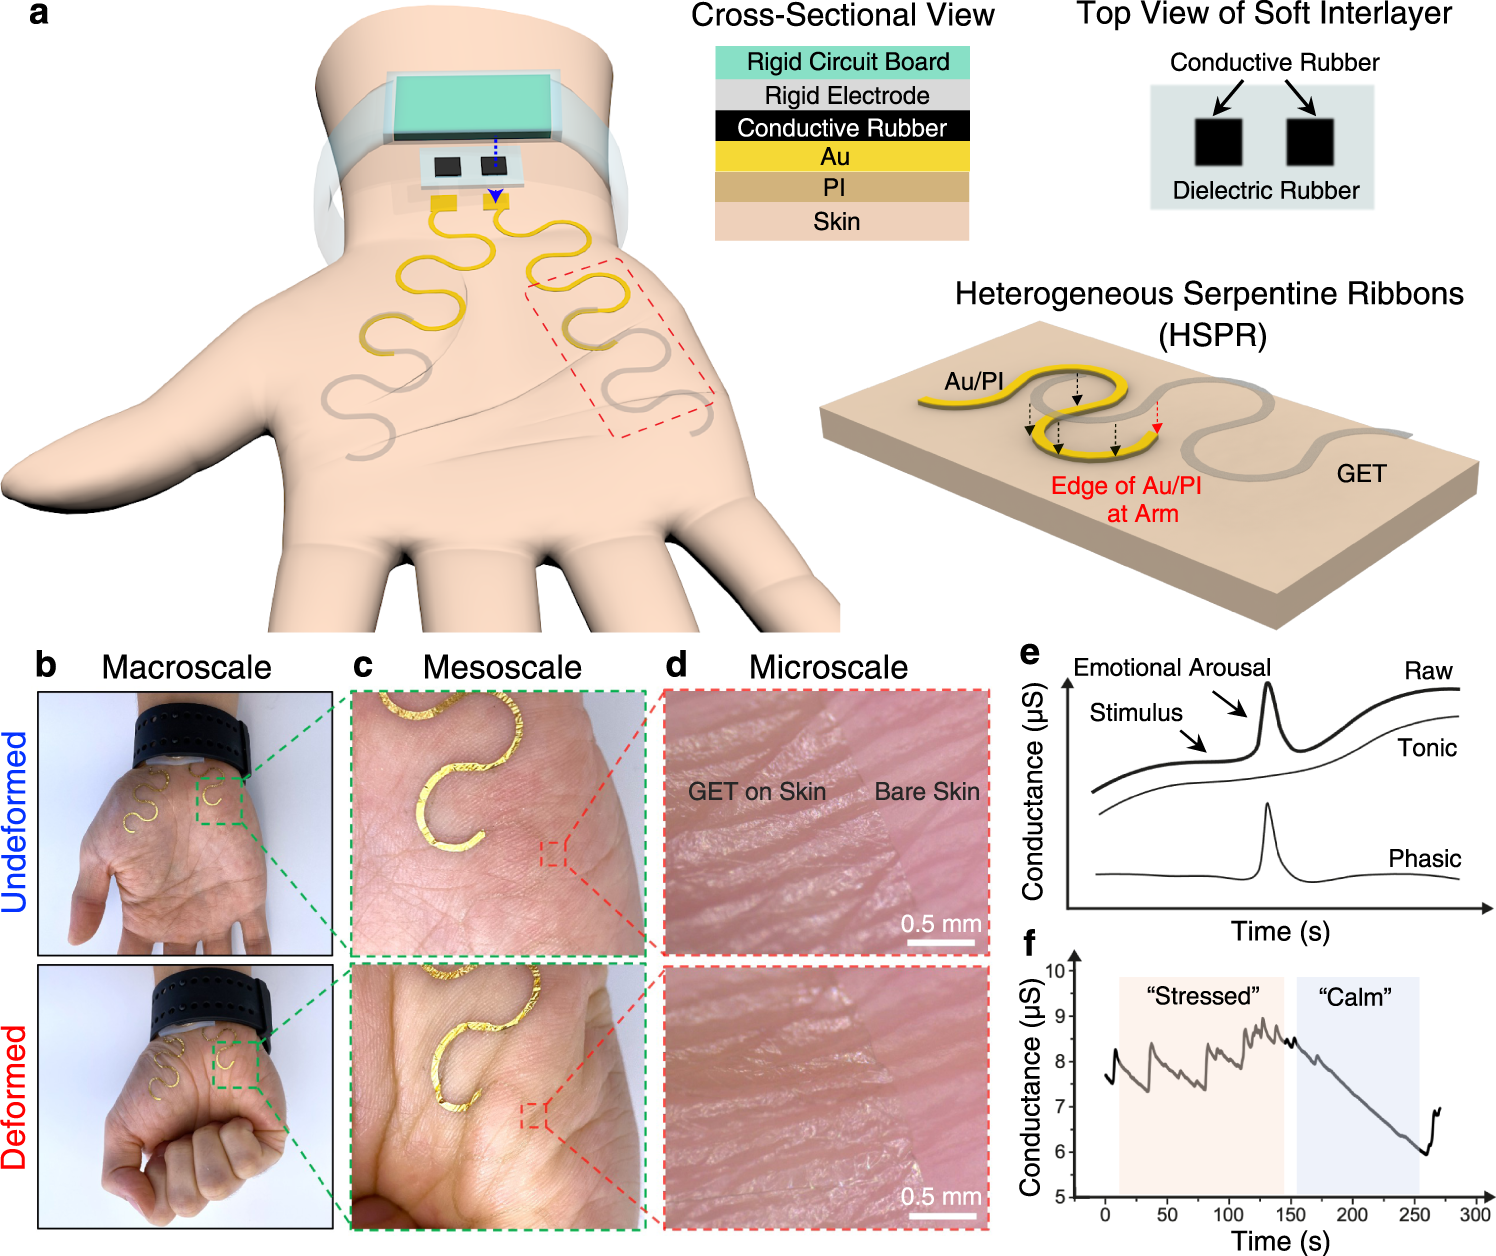 Graphene e-tattoos for unobstructive ambulatory electrodermal activity  sensing on the palm enabled by heterogeneous serpentine ribbons | Nature  Communications